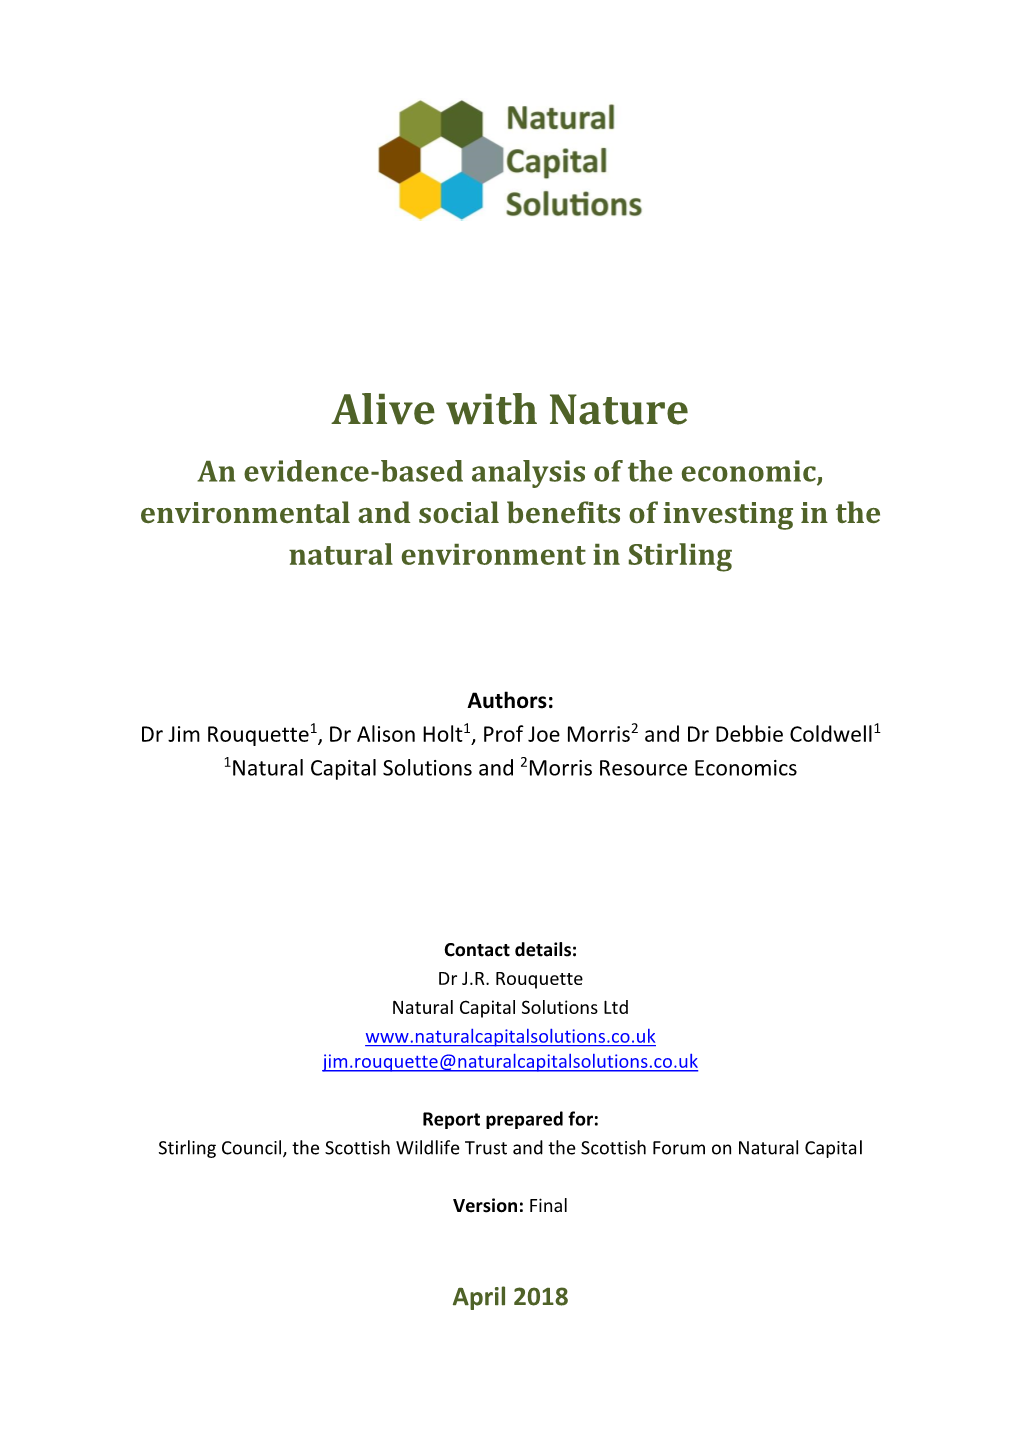 Alive with Nature an Evidence-Based Analysis of the Economic, Environmental and Social Benefits of Investing in the Natural Environment in Stirling